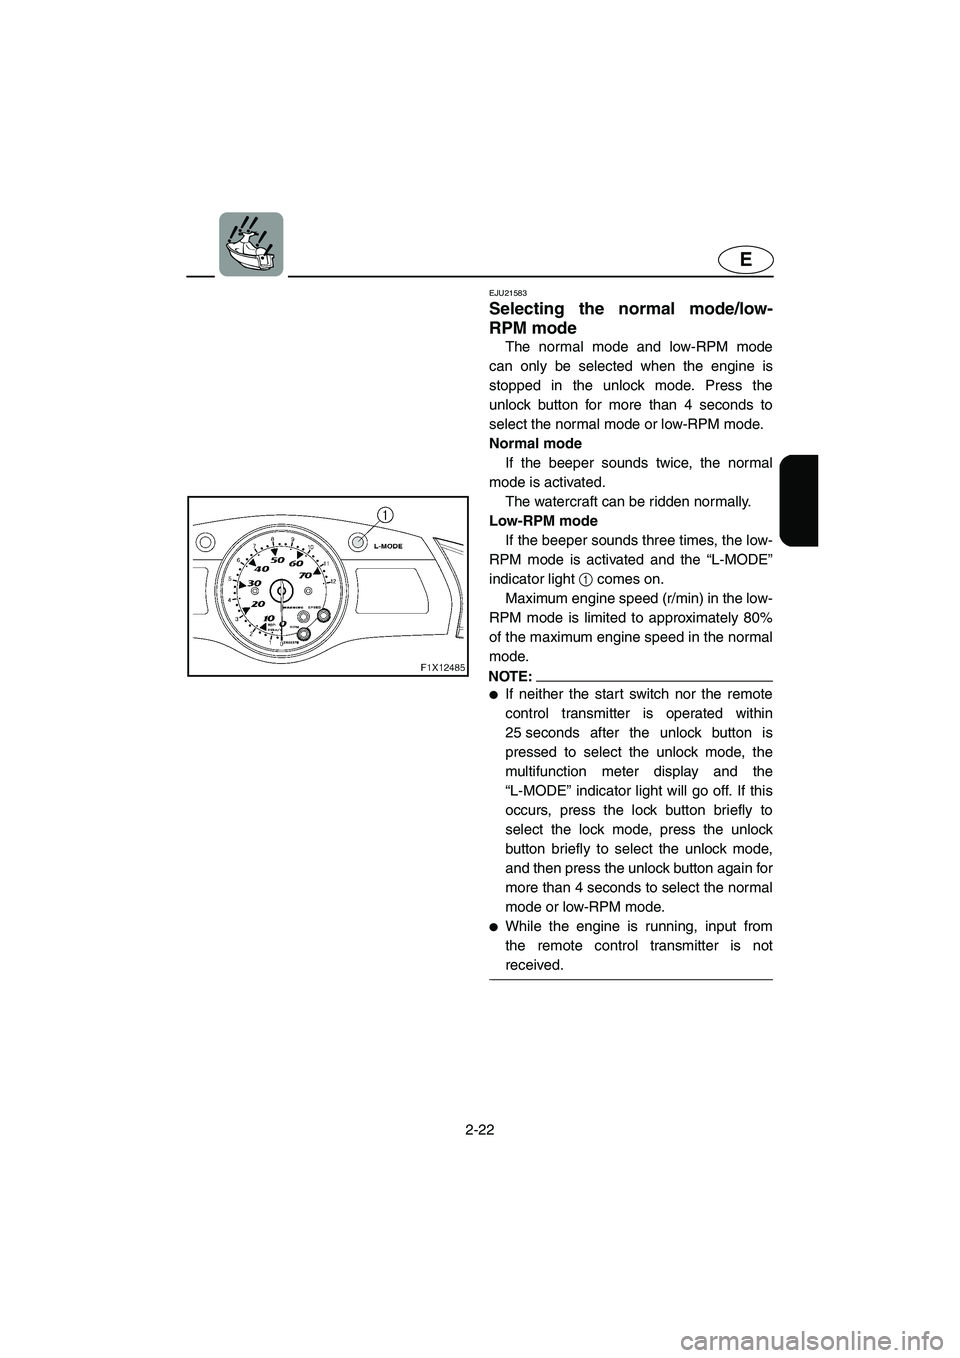 YAMAHA FX HO 2006  Owners Manual 2-22
E
EJU21583 
Selecting the normal mode/low-
RPM mode 
The normal mode and low-RPM mode
can only be selected when the engine is
stopped in the unlock mode. Press the
unlock button for more than 4 s